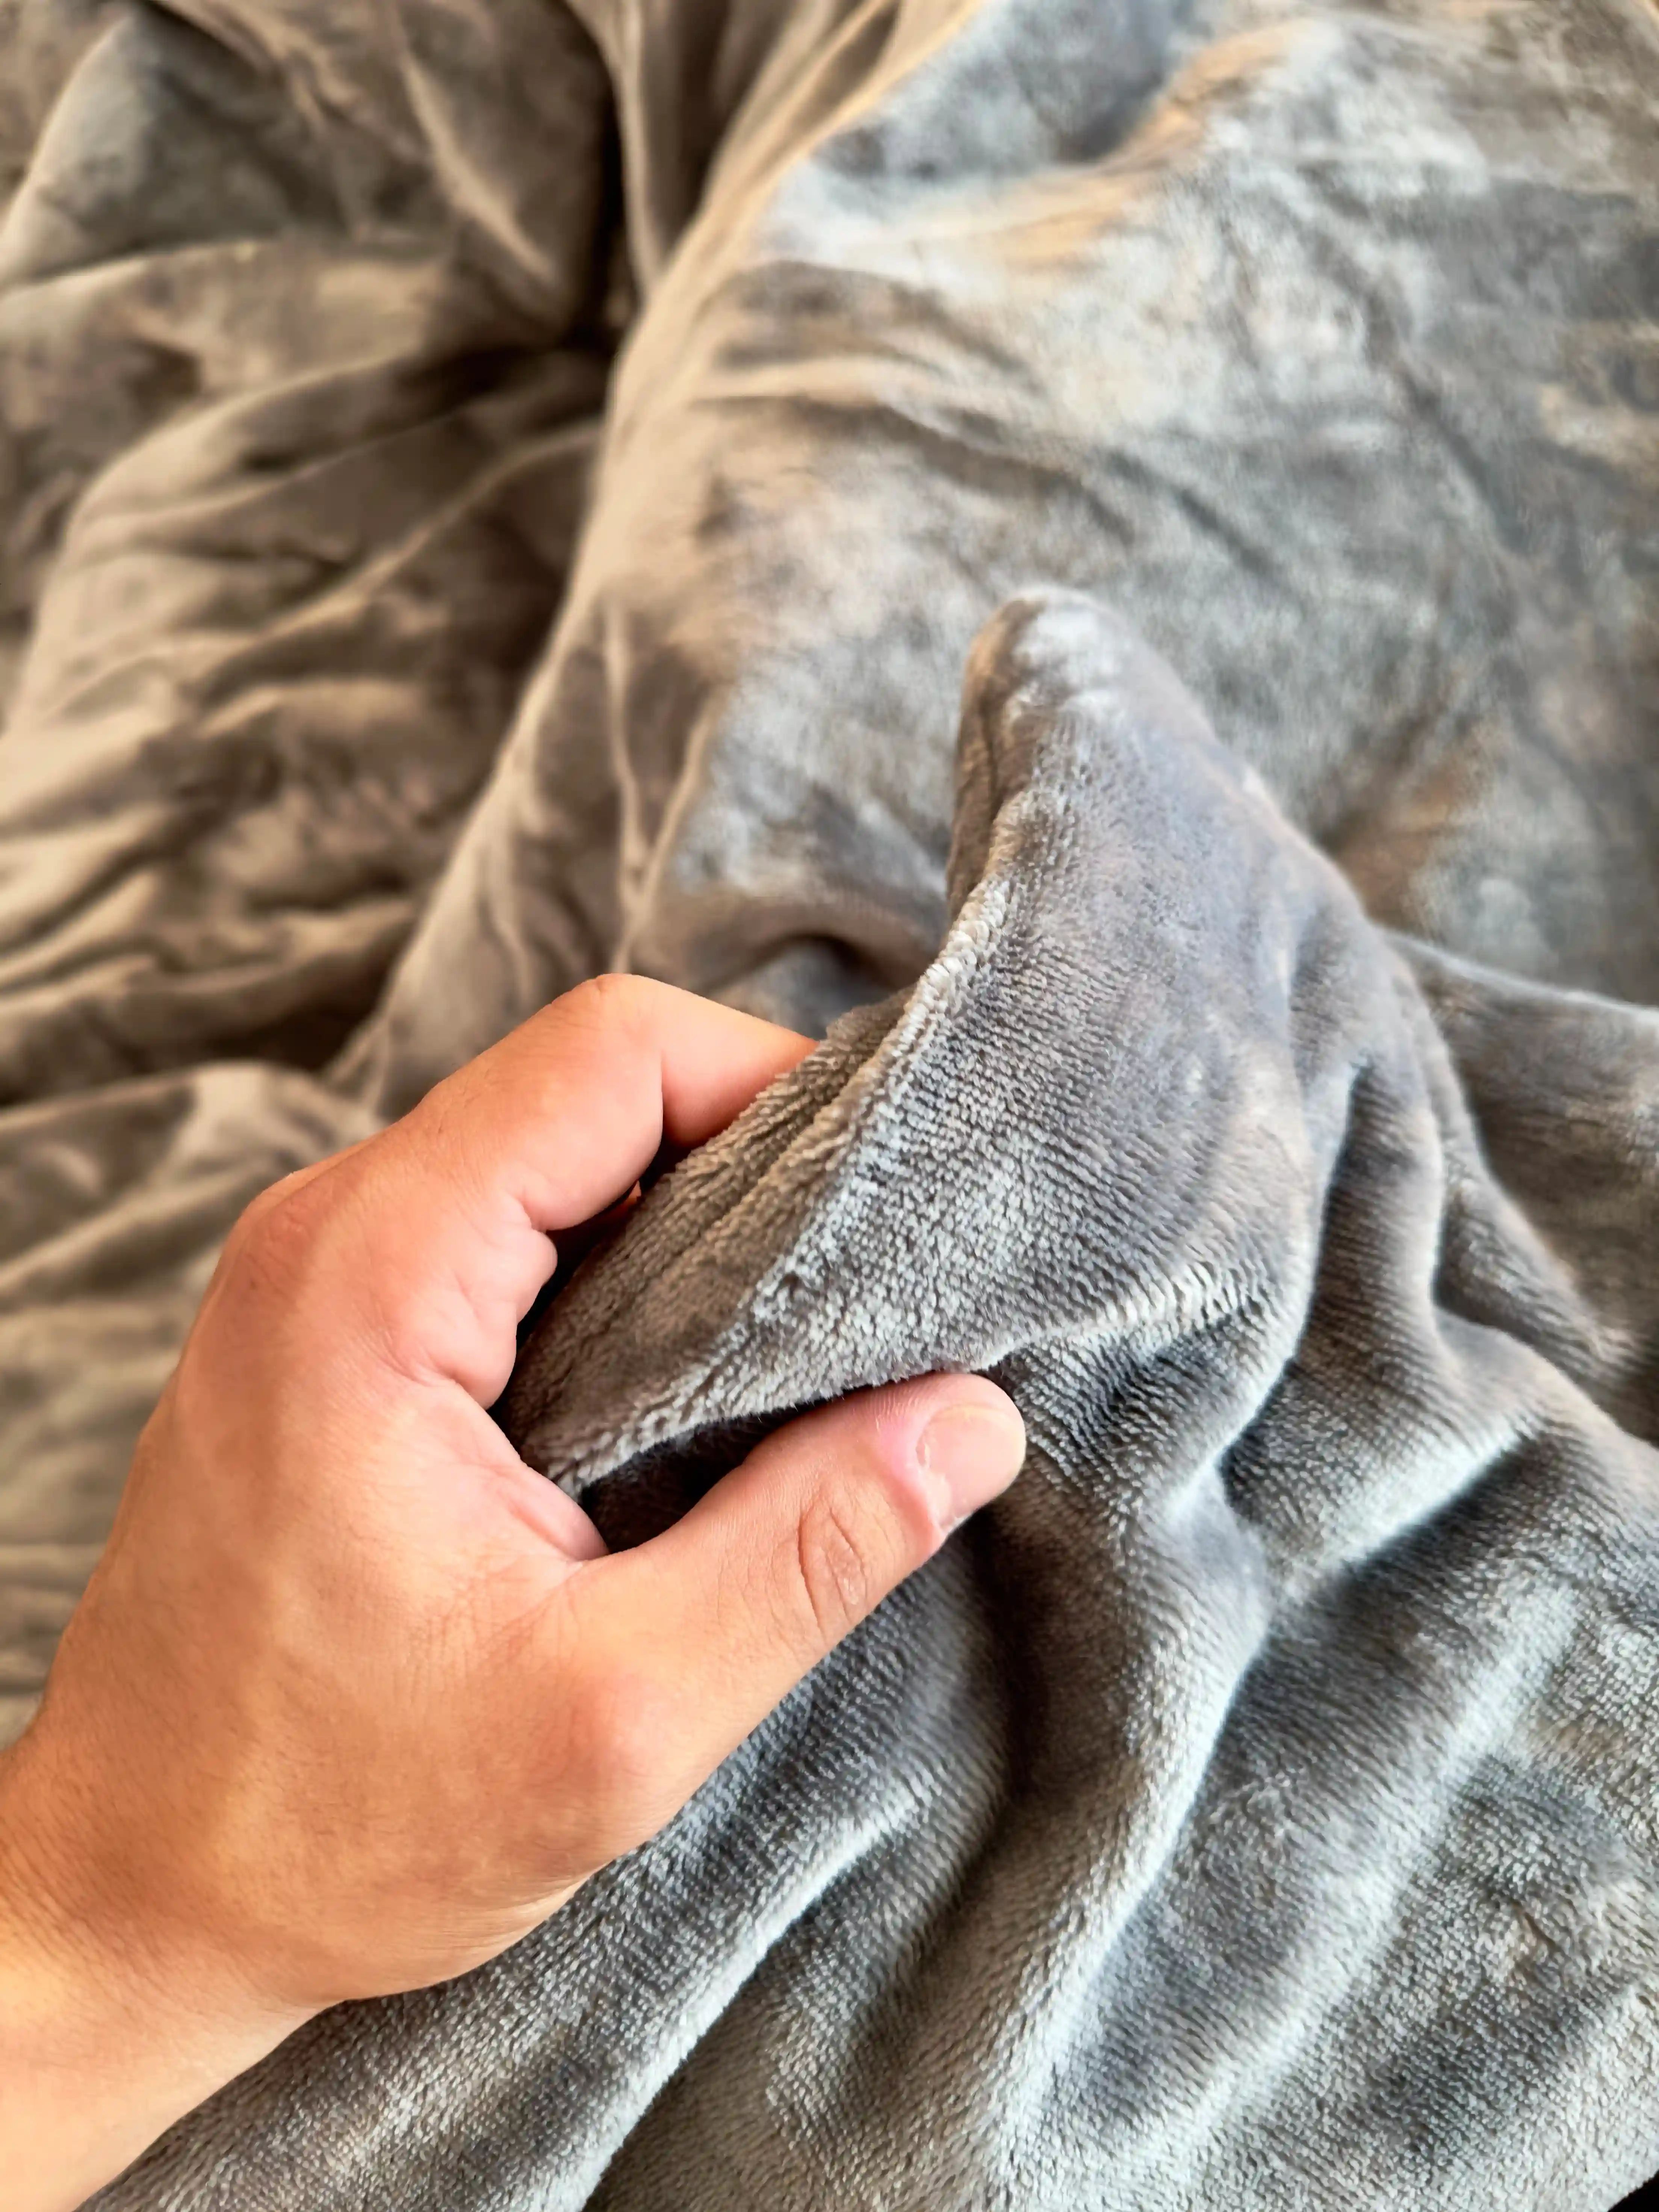 Zonli Heated Weighted blanket